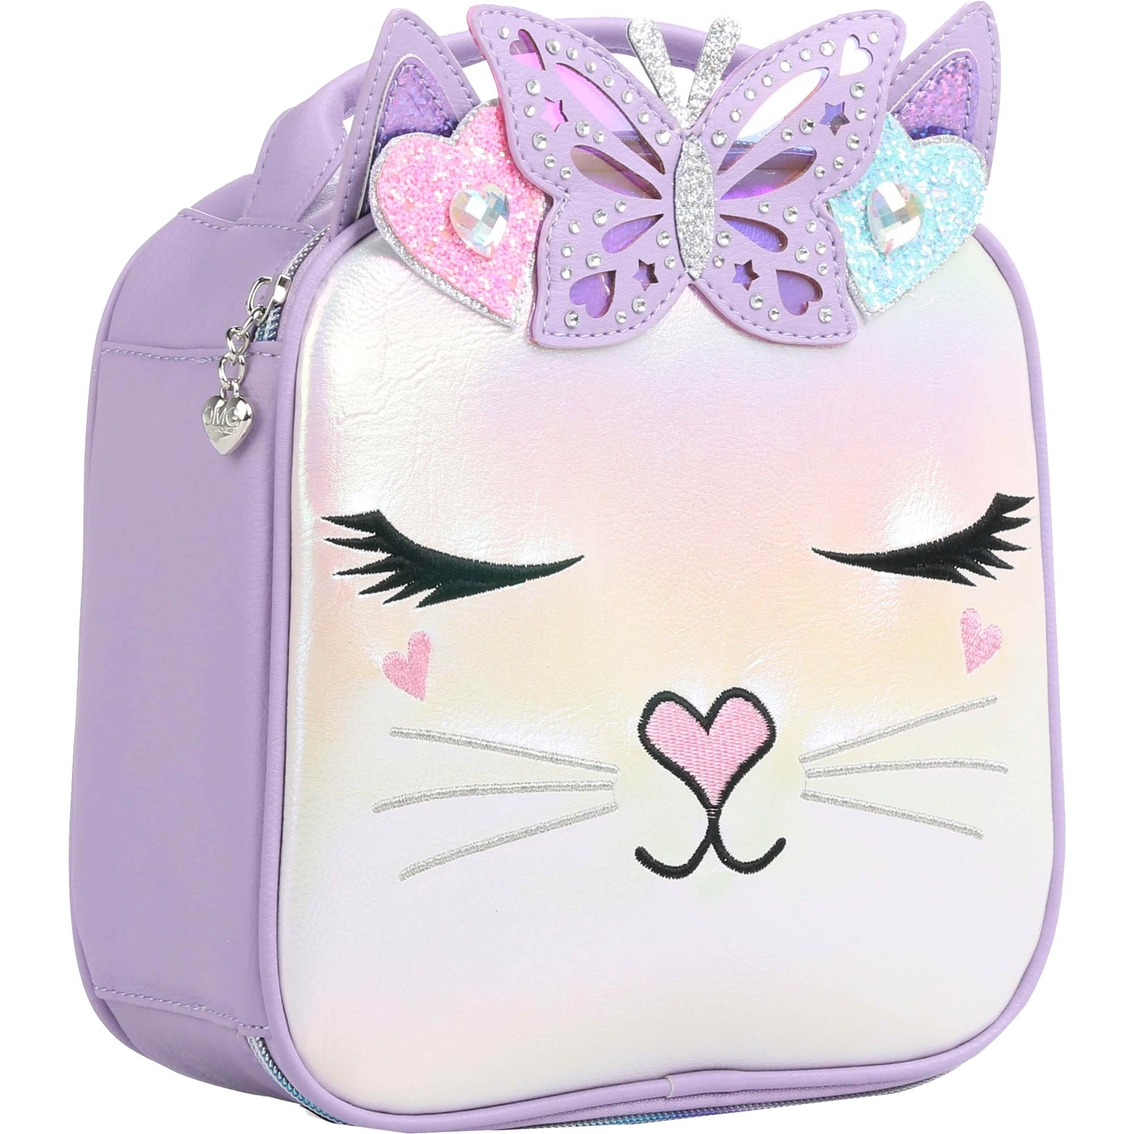 OMG Accessories Bella Kitty Insolated Lunch Bag - Image 2 of 2